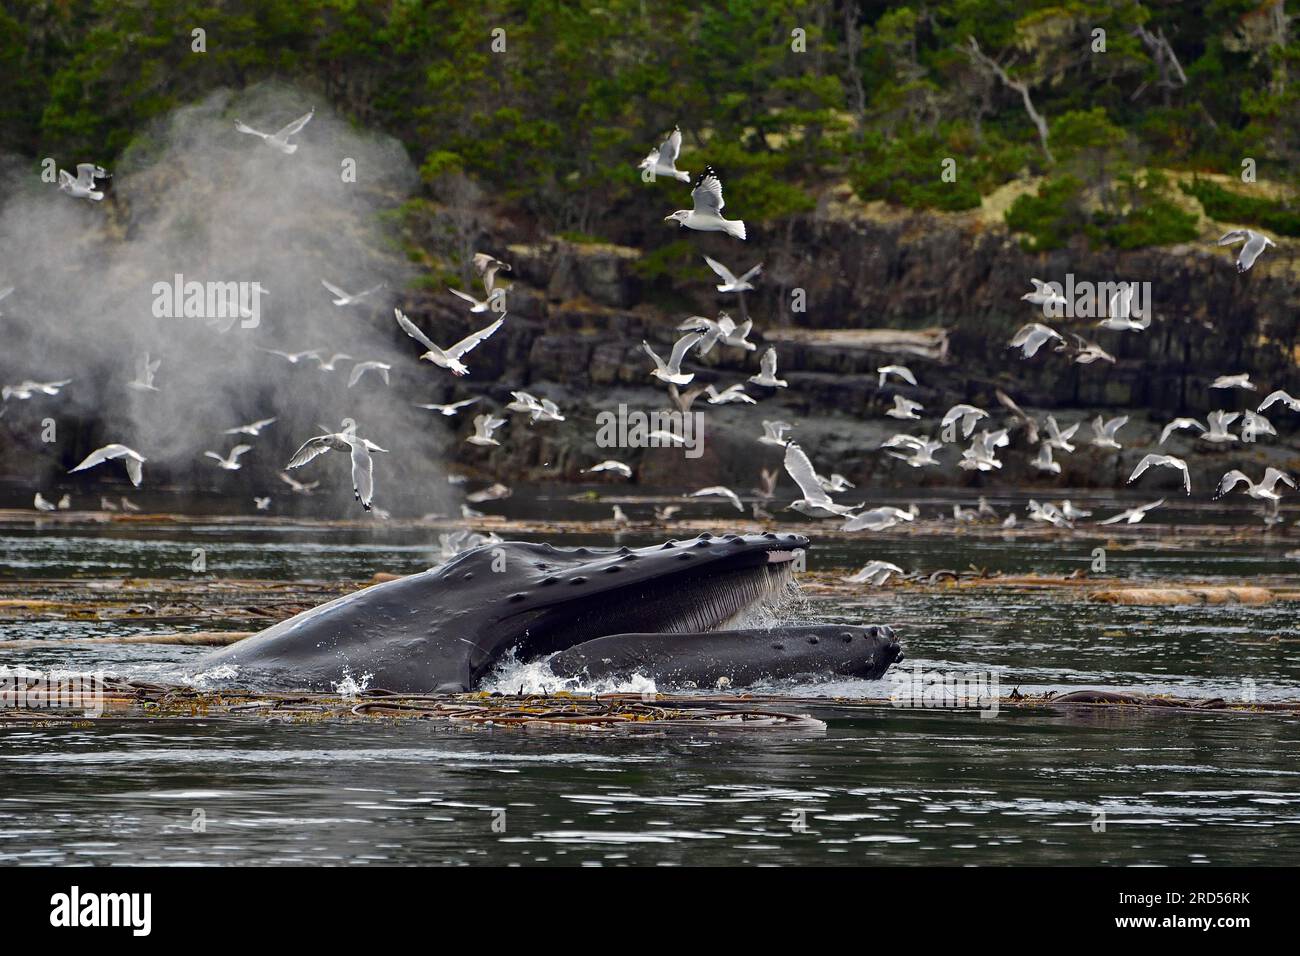 Humpback whale (Megaptera novaeangliae) swims through the sea with its mouth open and eats krill Stock Photo